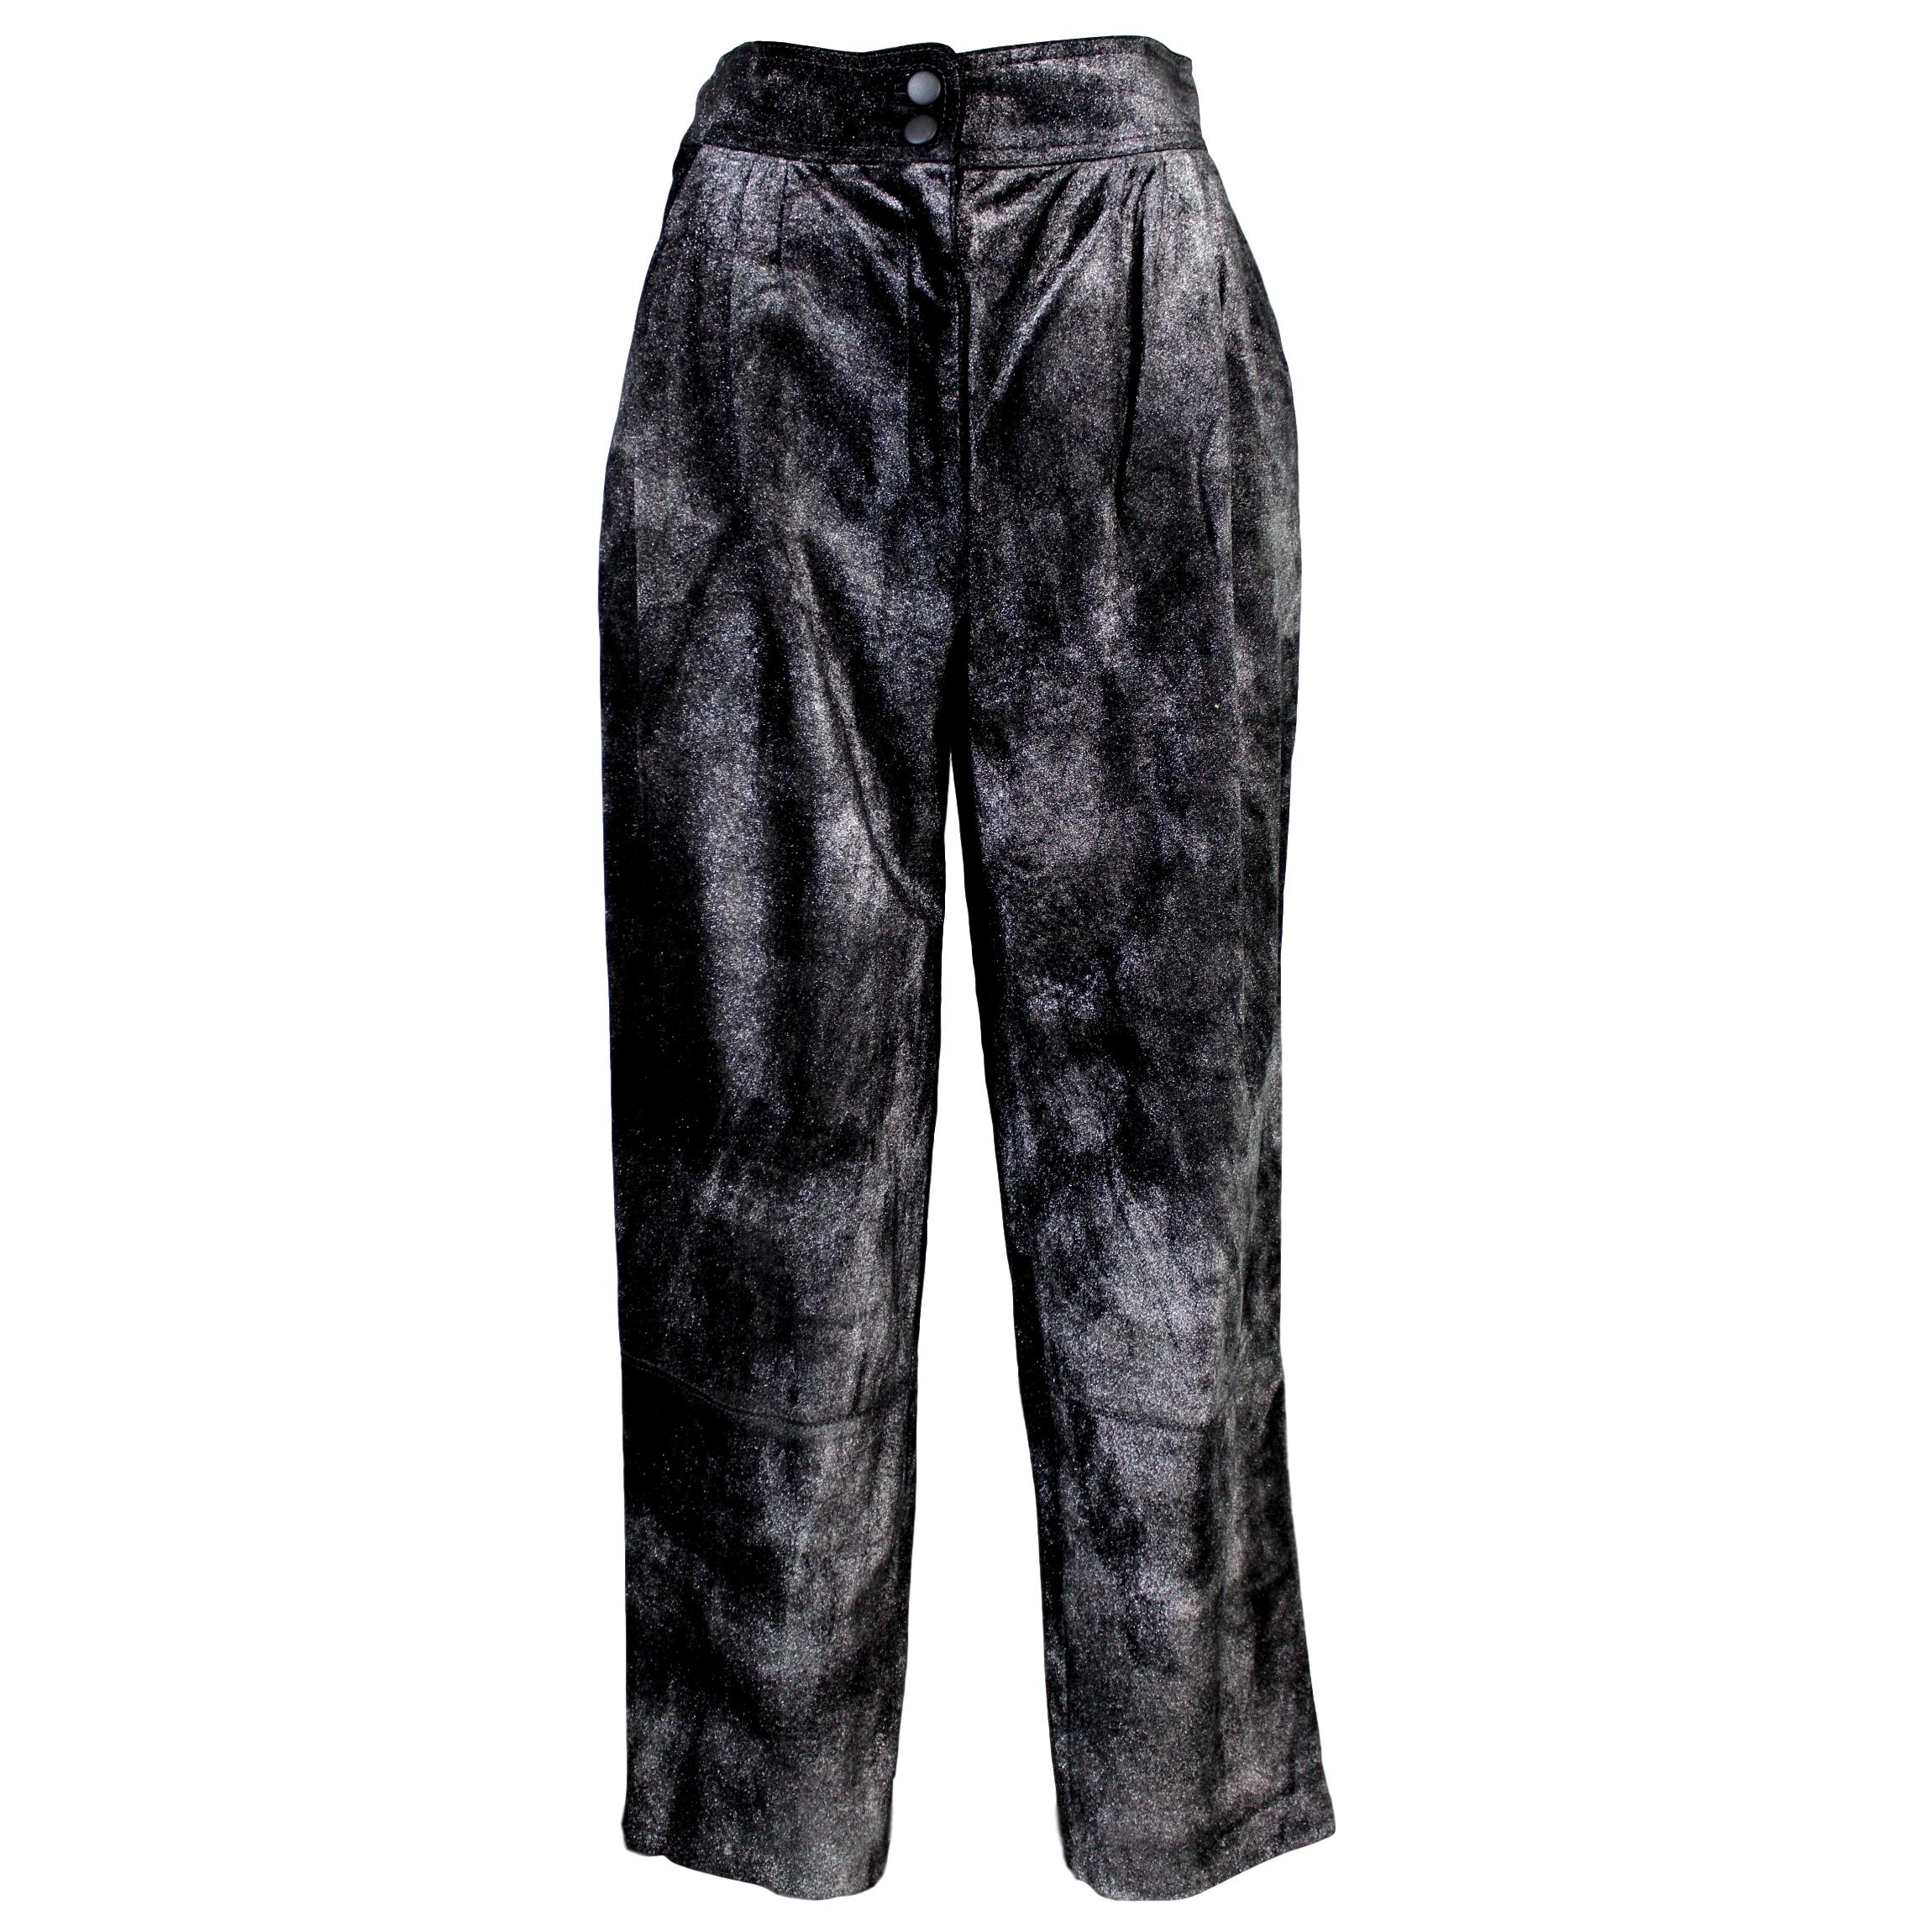 Krizia Black and Silver Pigskin Leather Lamè Iridescent Pants 1980s  Style NWT For Sale